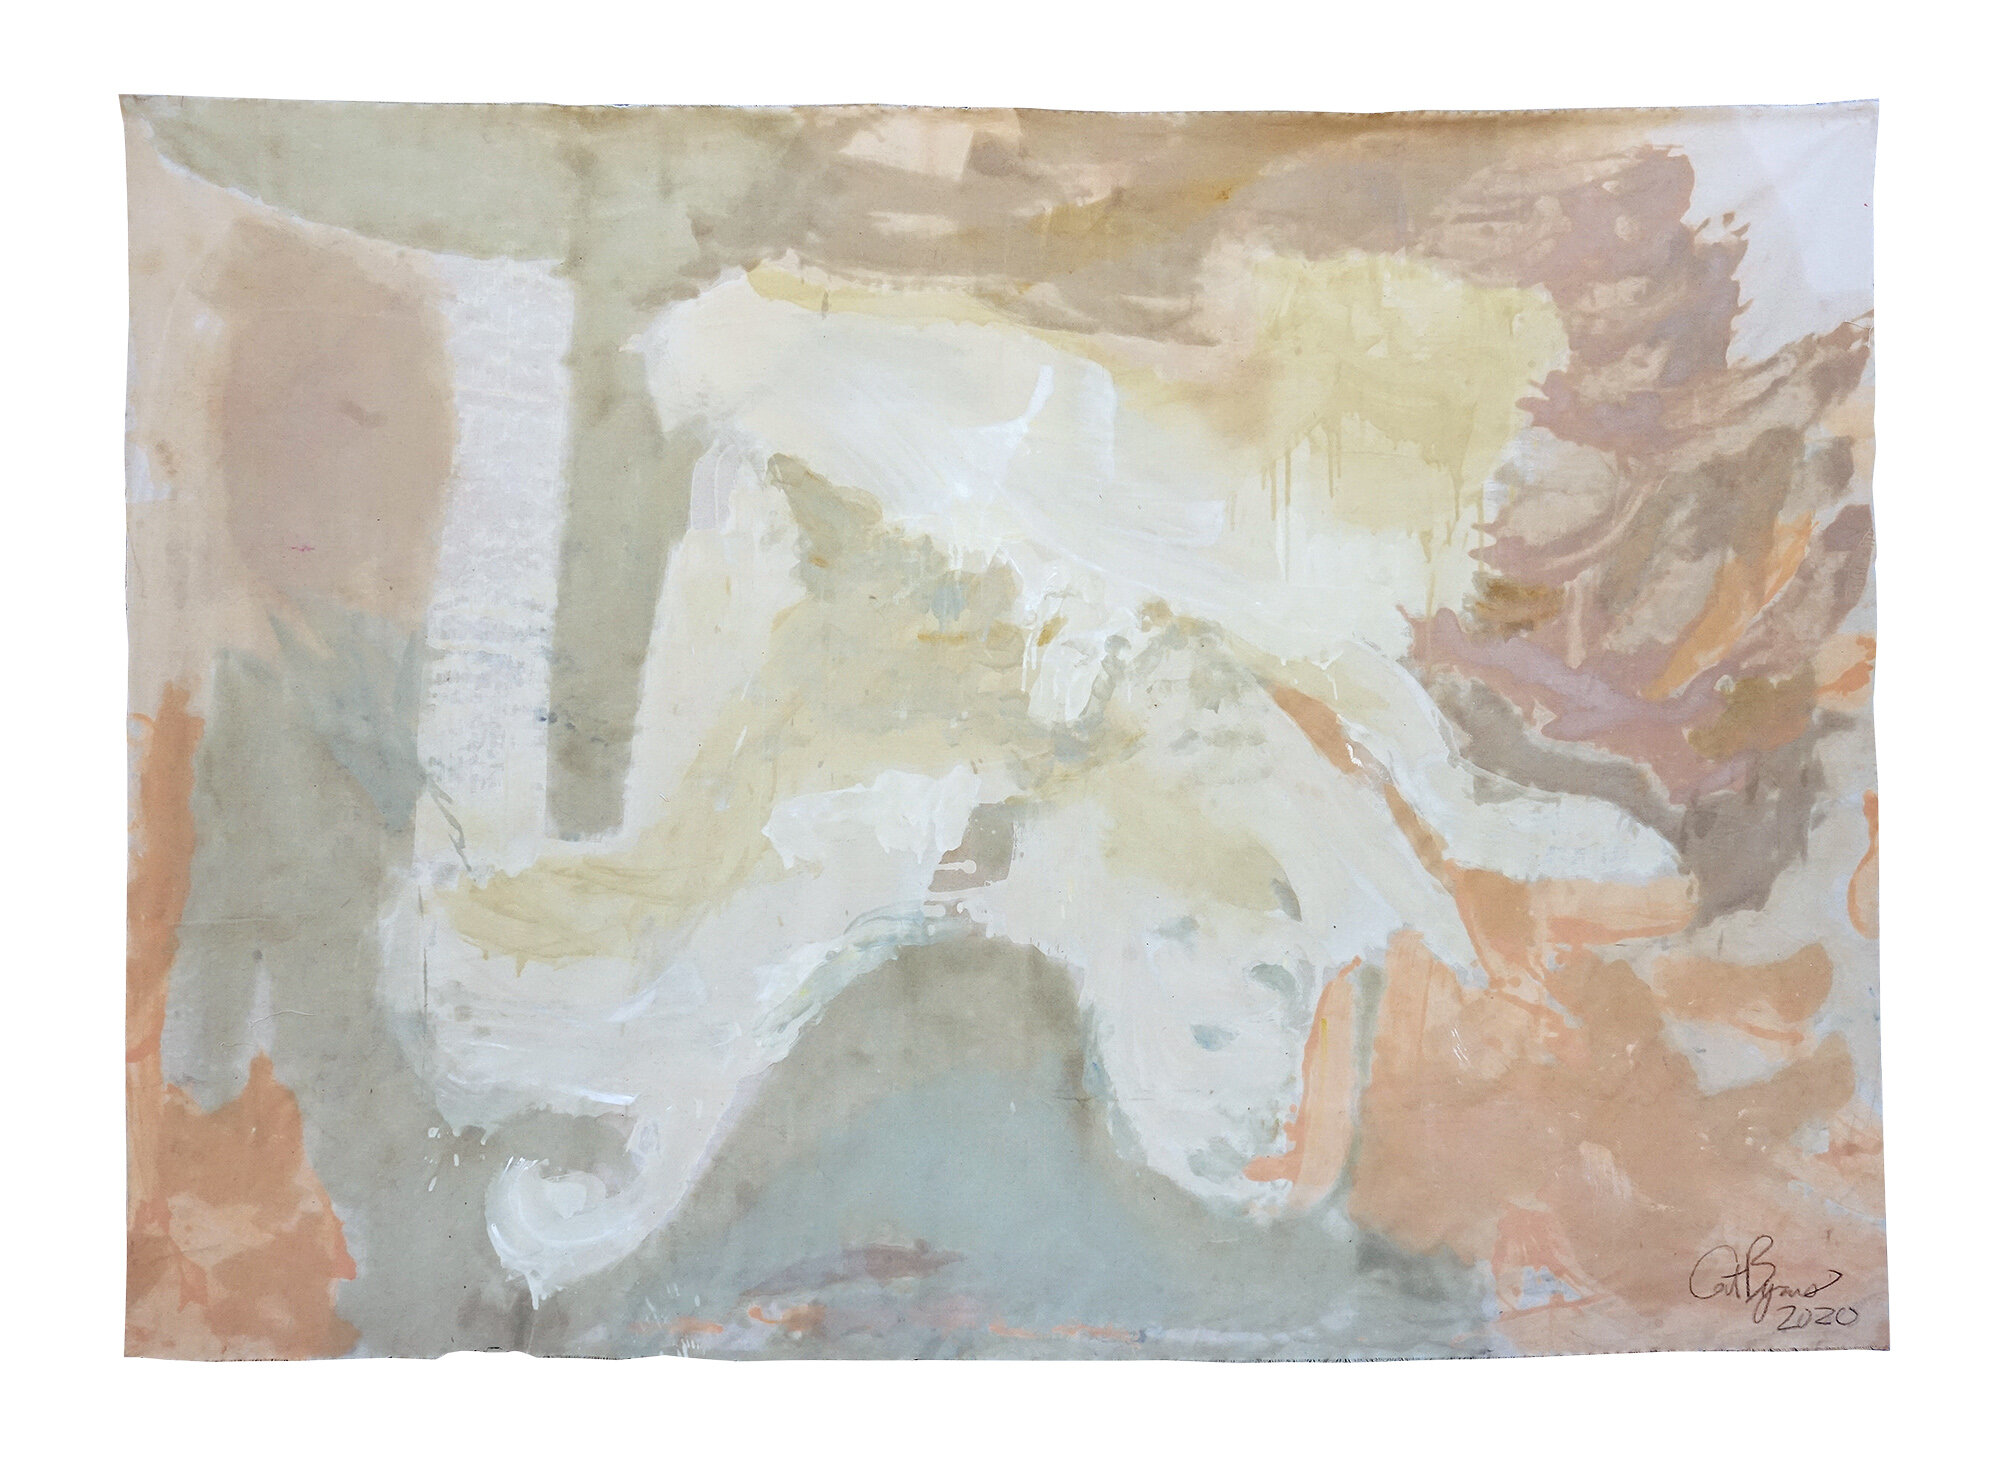  untitled, new york city, 2020    oil on unprimed canvas    60 x 84 inches 